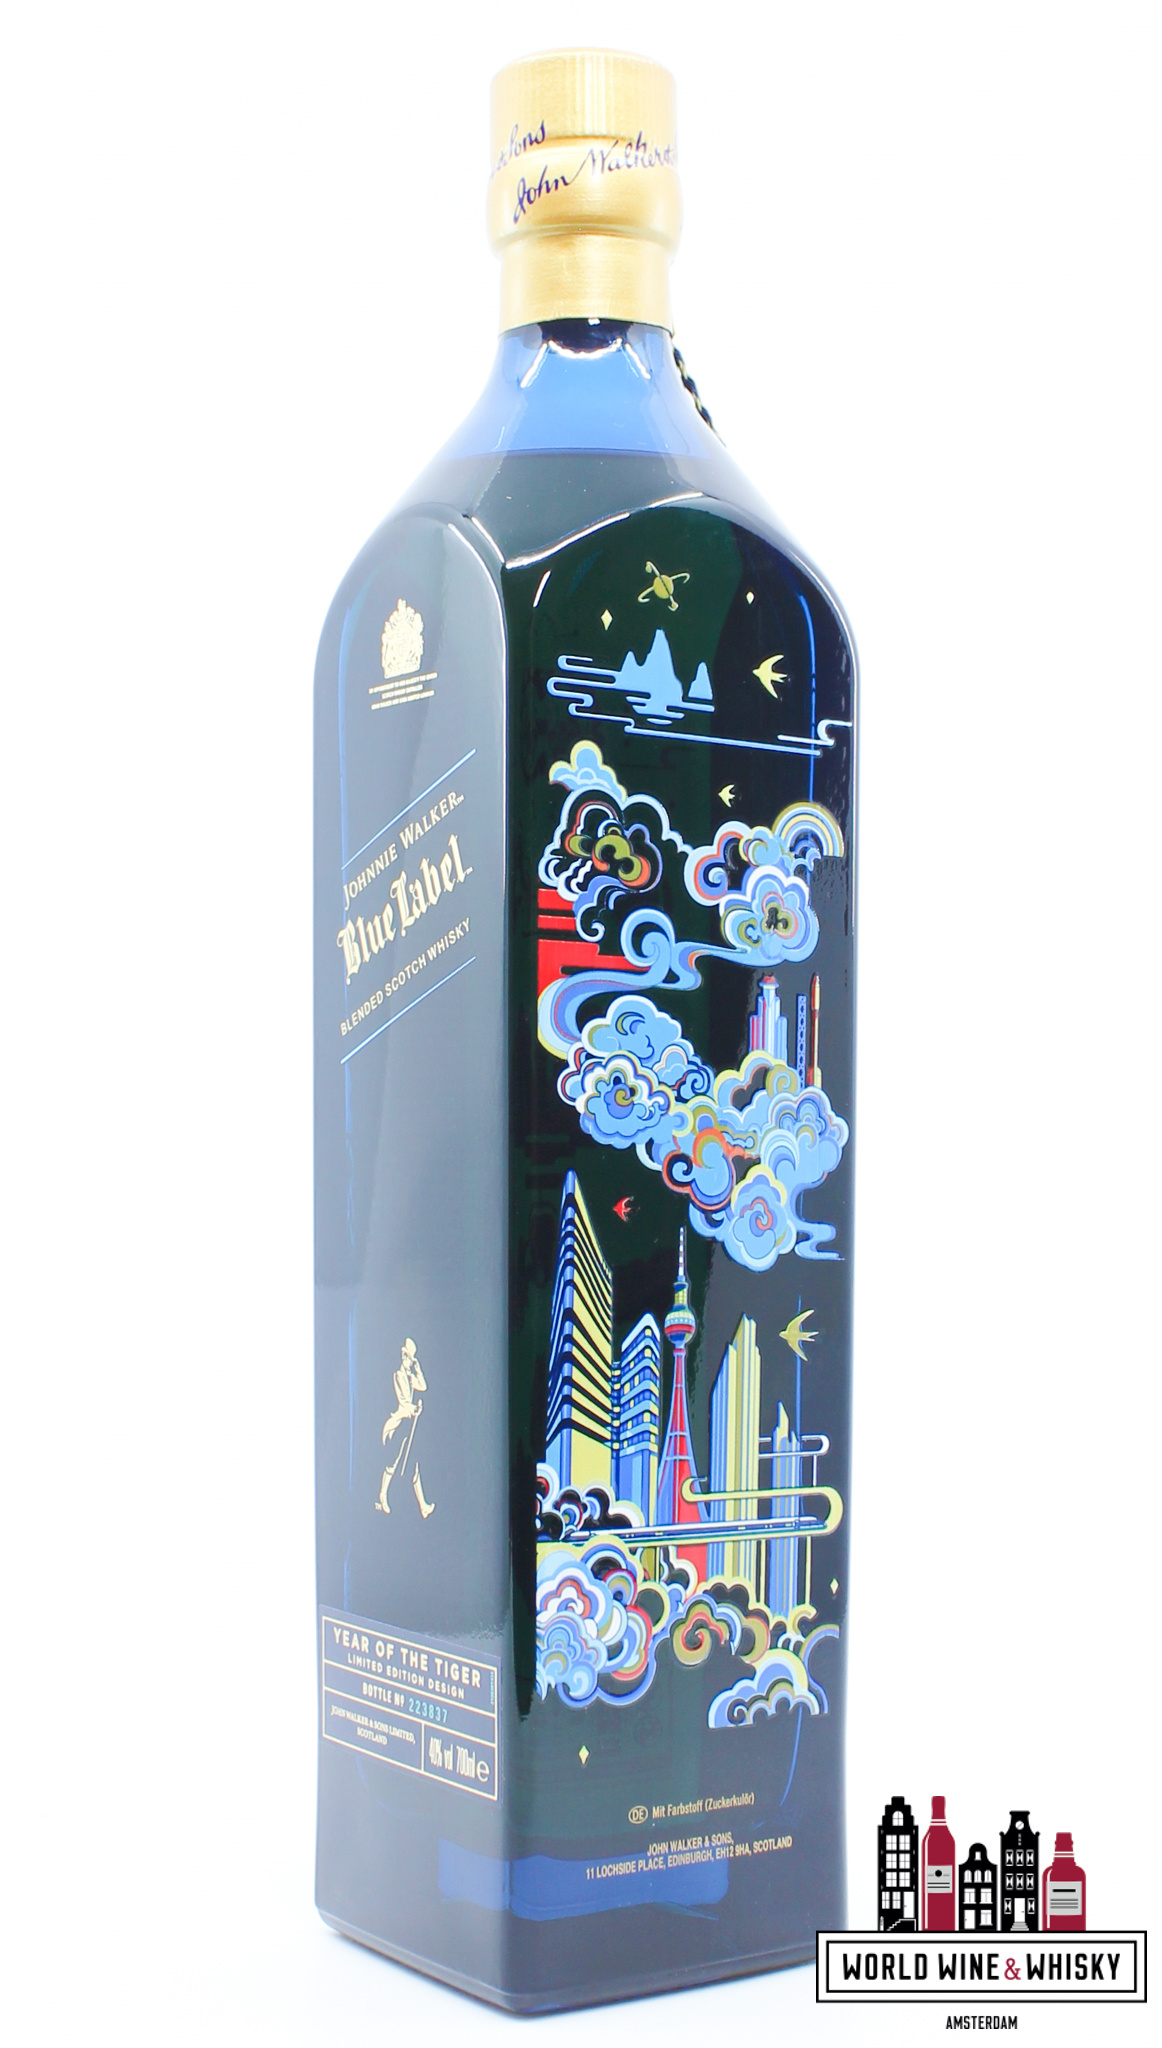 Johnnie Walker Johnnie Walker 2021 Blue Label - Year of the Tiger - Limited Edition Design (Shan Jiang) 40%